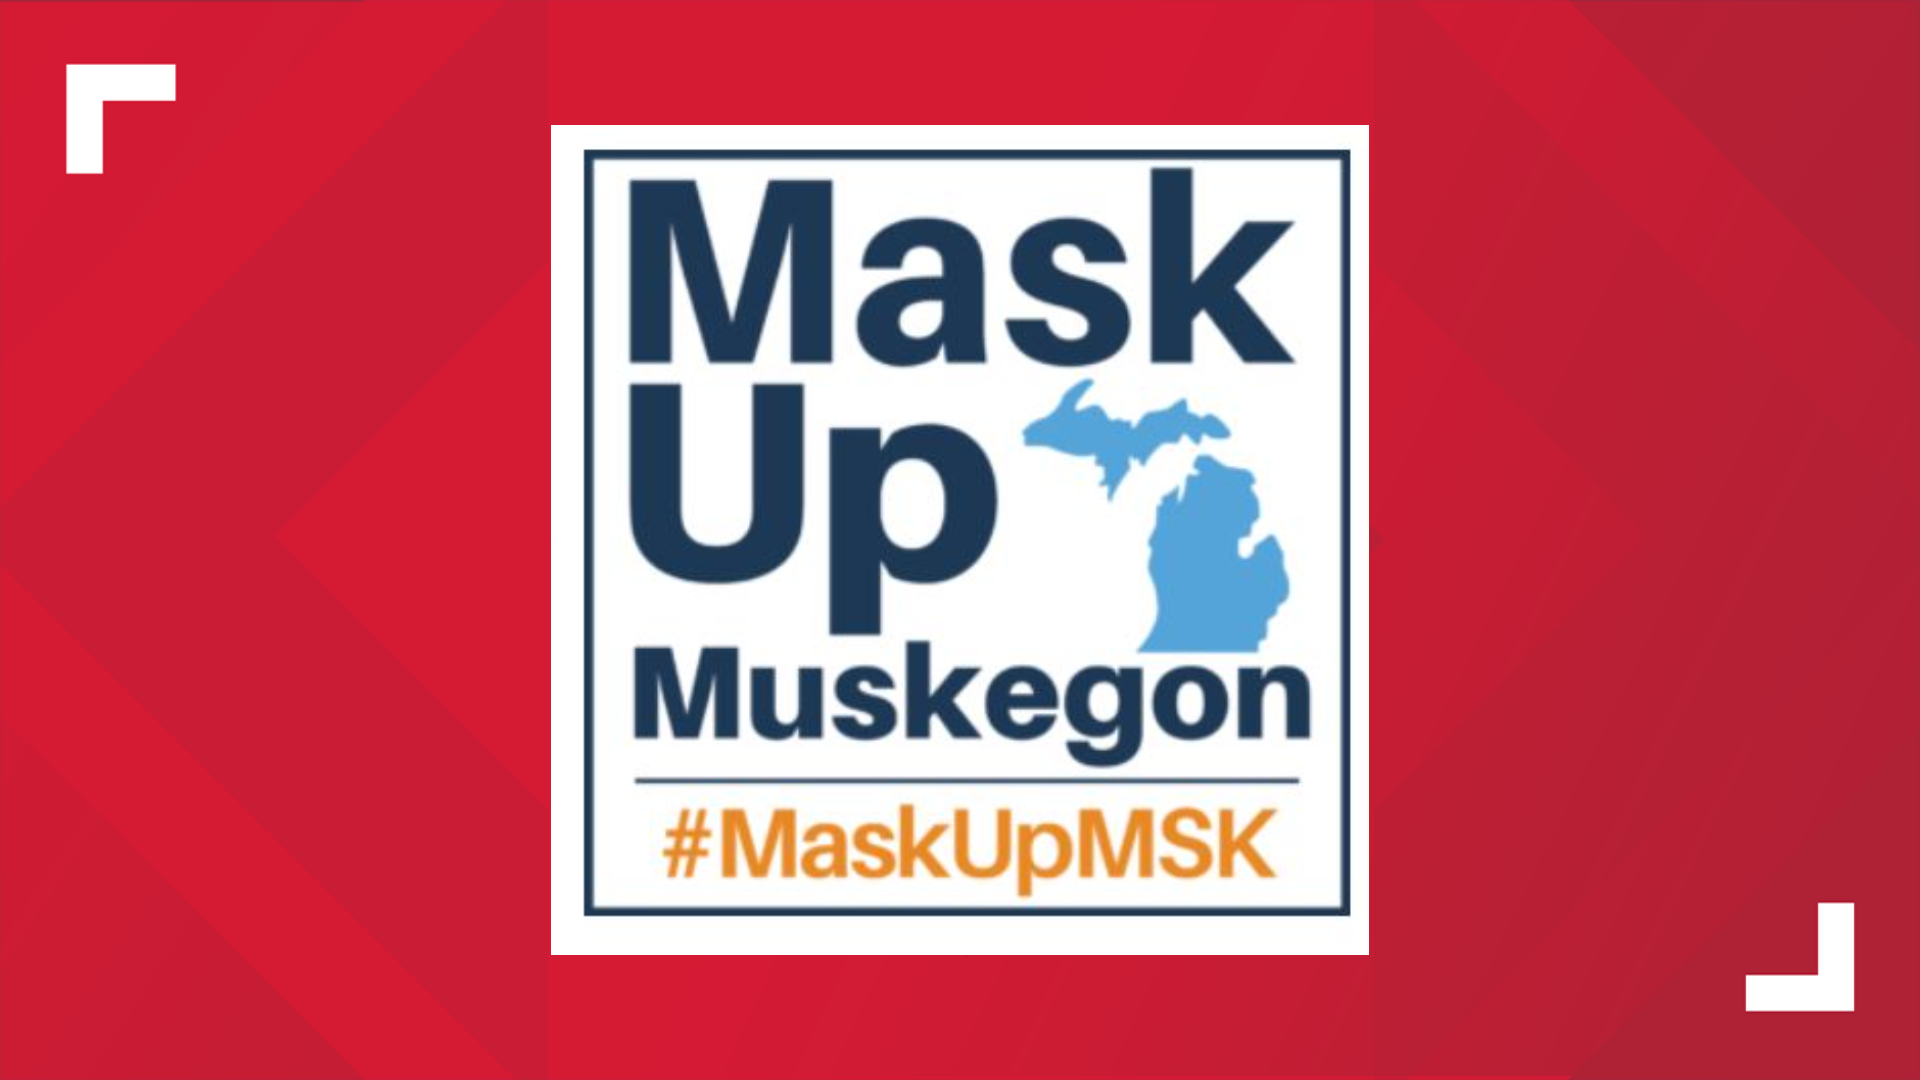 The Mask Up Muskegon outreach campaign, has used social media to spread important COVID-19 information and now they've created a website for it.